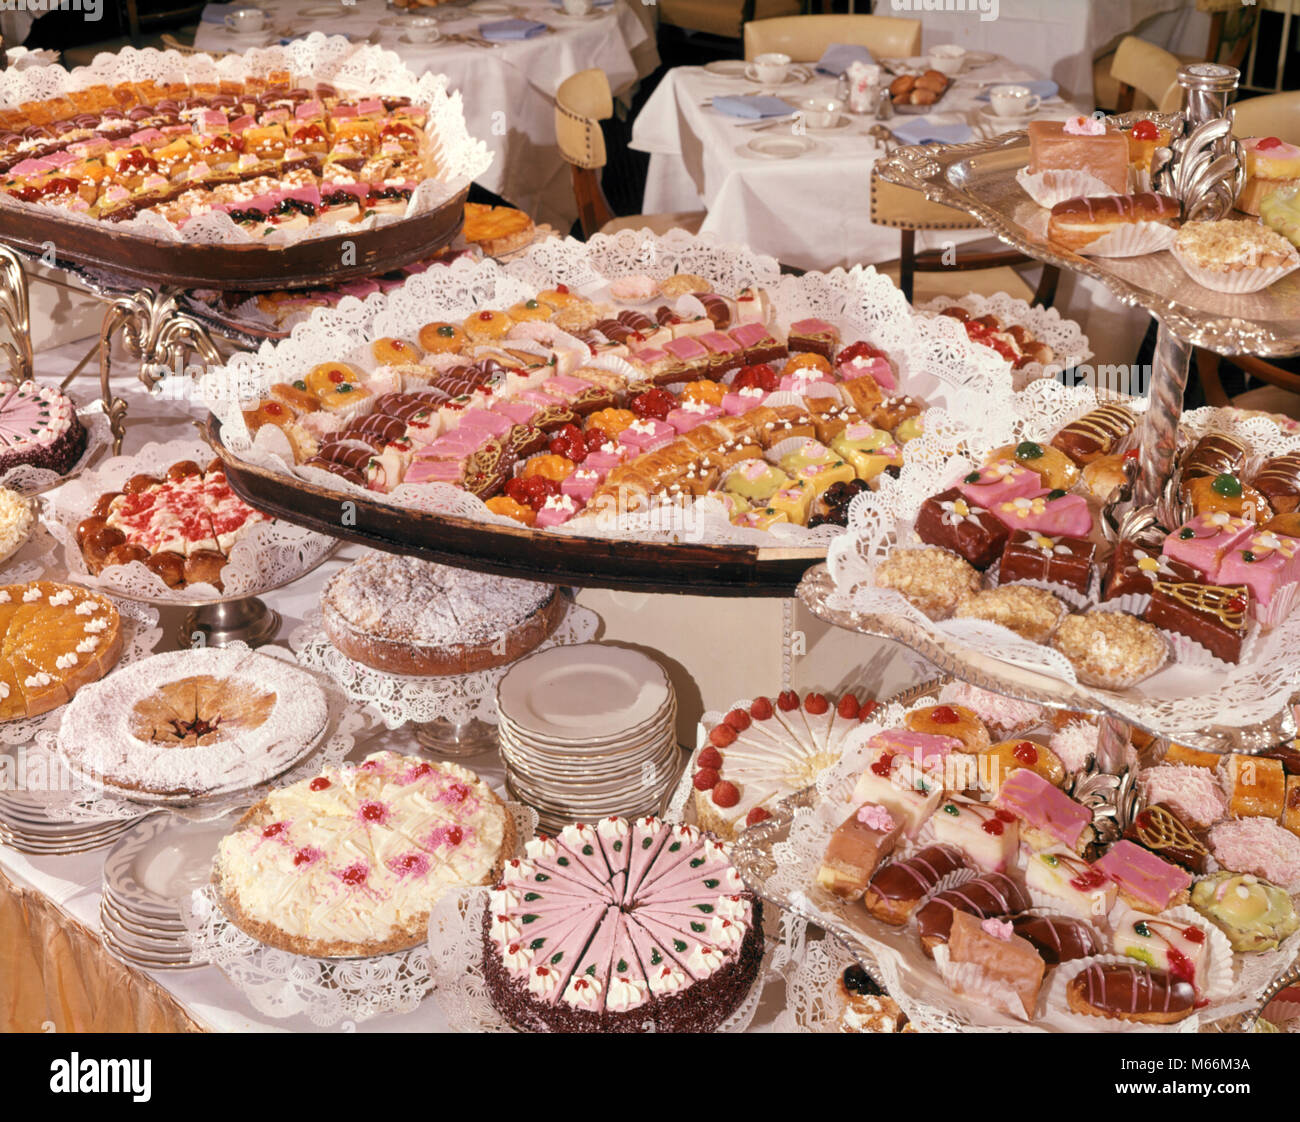 1960s RESTAURANT DESSERT BUFFET DISPLAY PASTRIES INCLUDING SWEETS CAKES PIES ECLAIRS PETITS FOURS - kf5844 HAR001 HARS OLD FASHIONED OVERABUNDANCE PETIT FOUR PETITS FOURS PROFUSION QUANTITY SELF SERVE Stock Photo